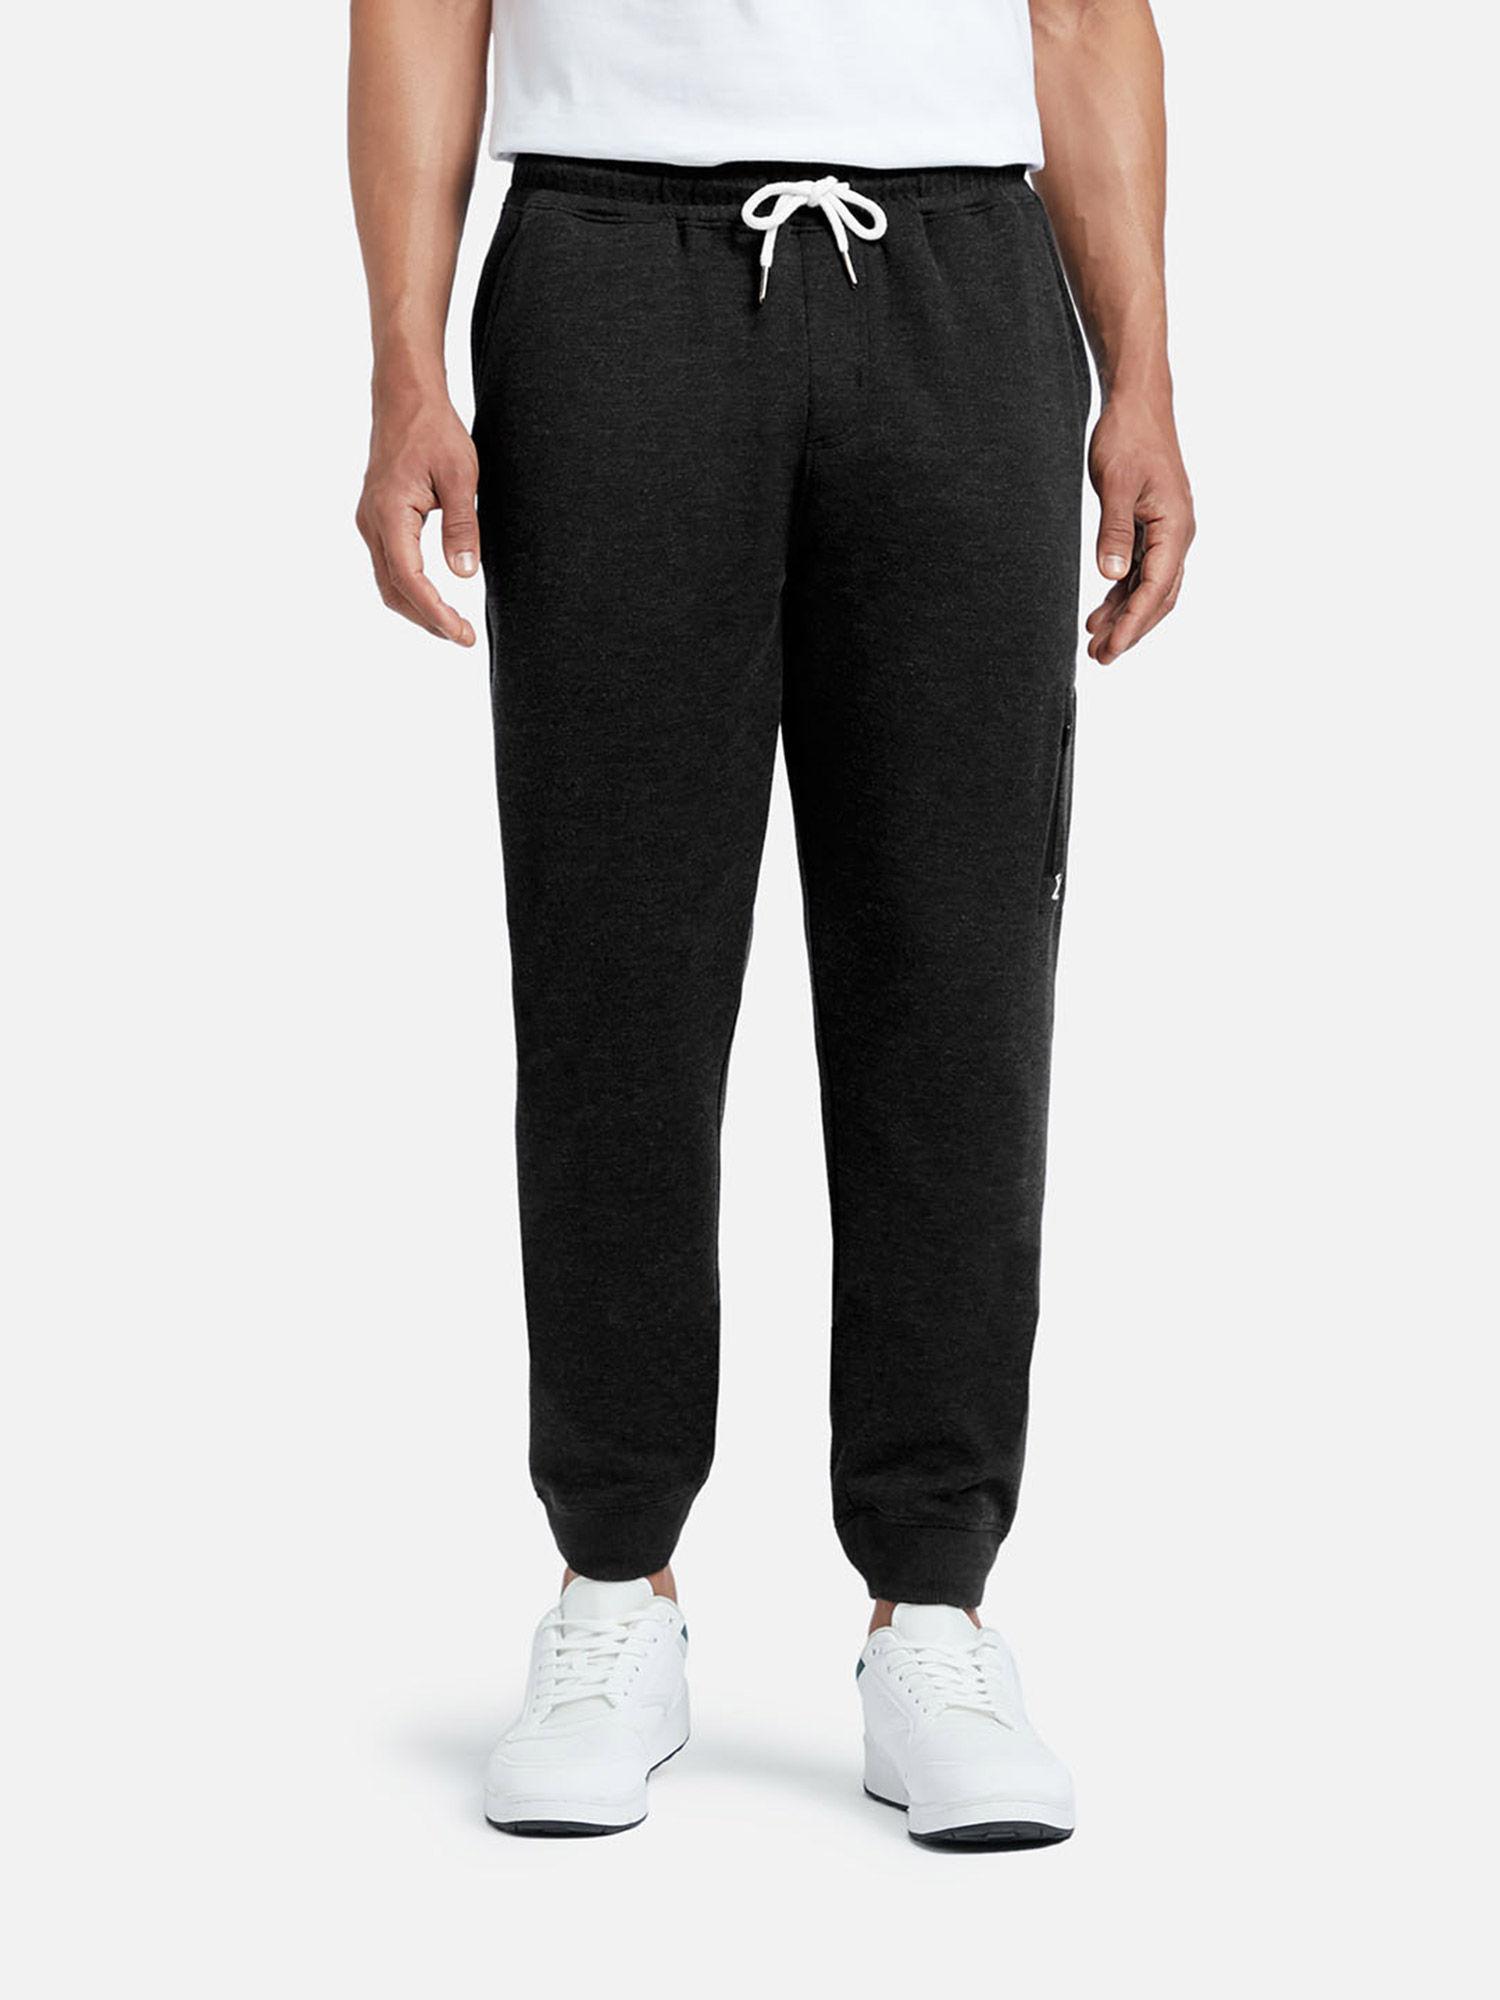 mens cotton rich solid joggers with zipper pocket